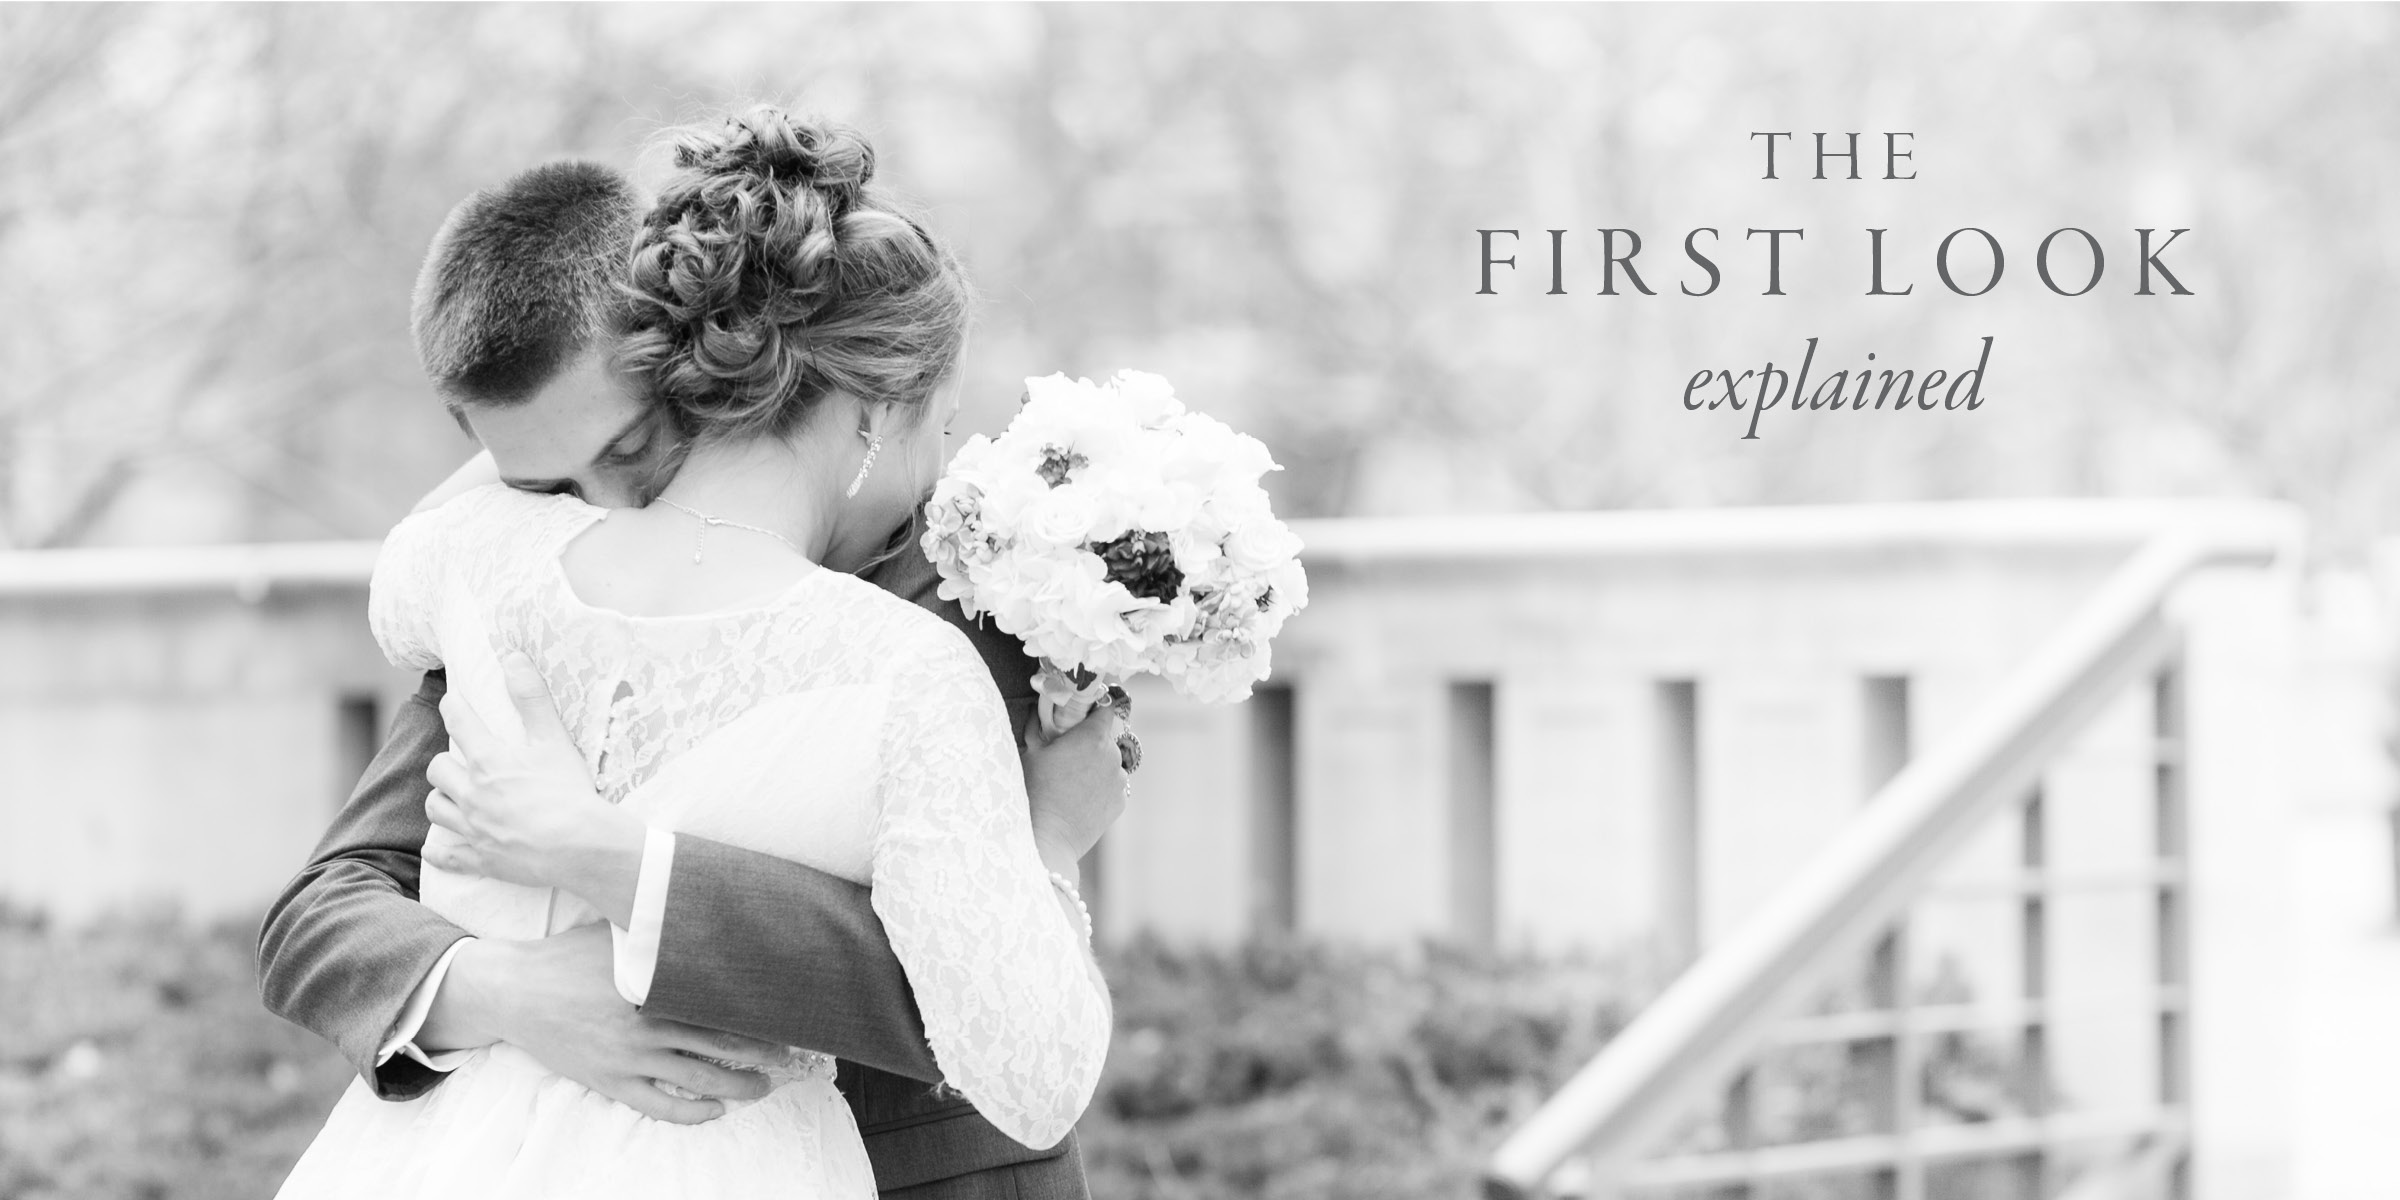 what is a first look with a groom?